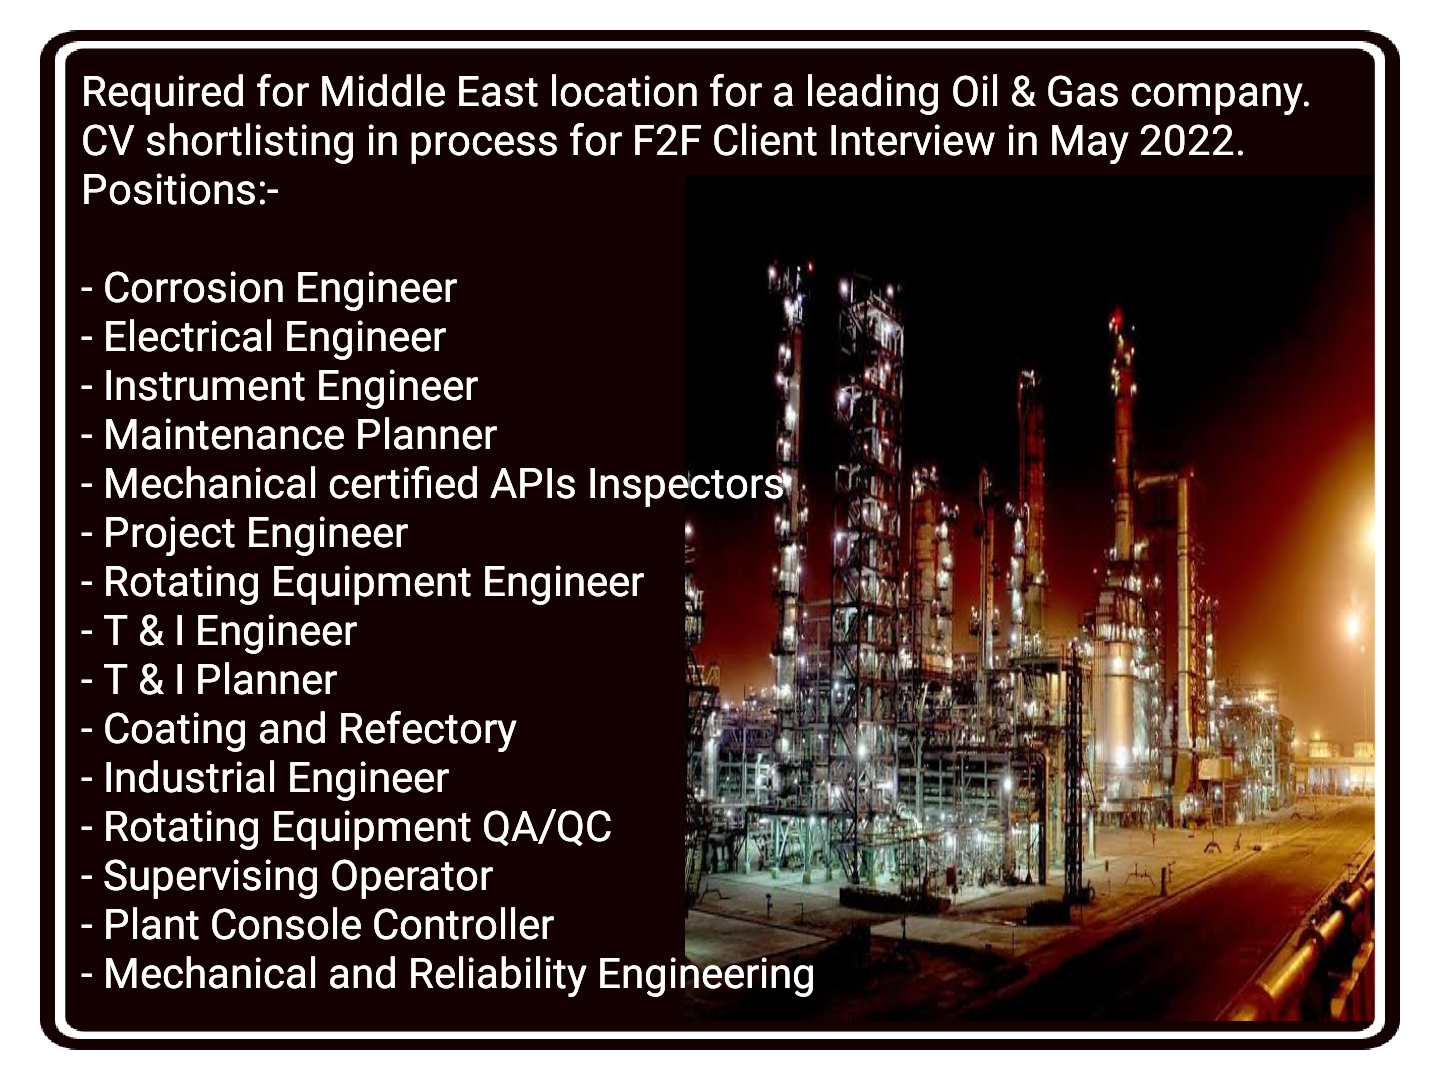 Electrical, Mechanical, Instrument, T&I Engineer & Plant Console Operator Jobs